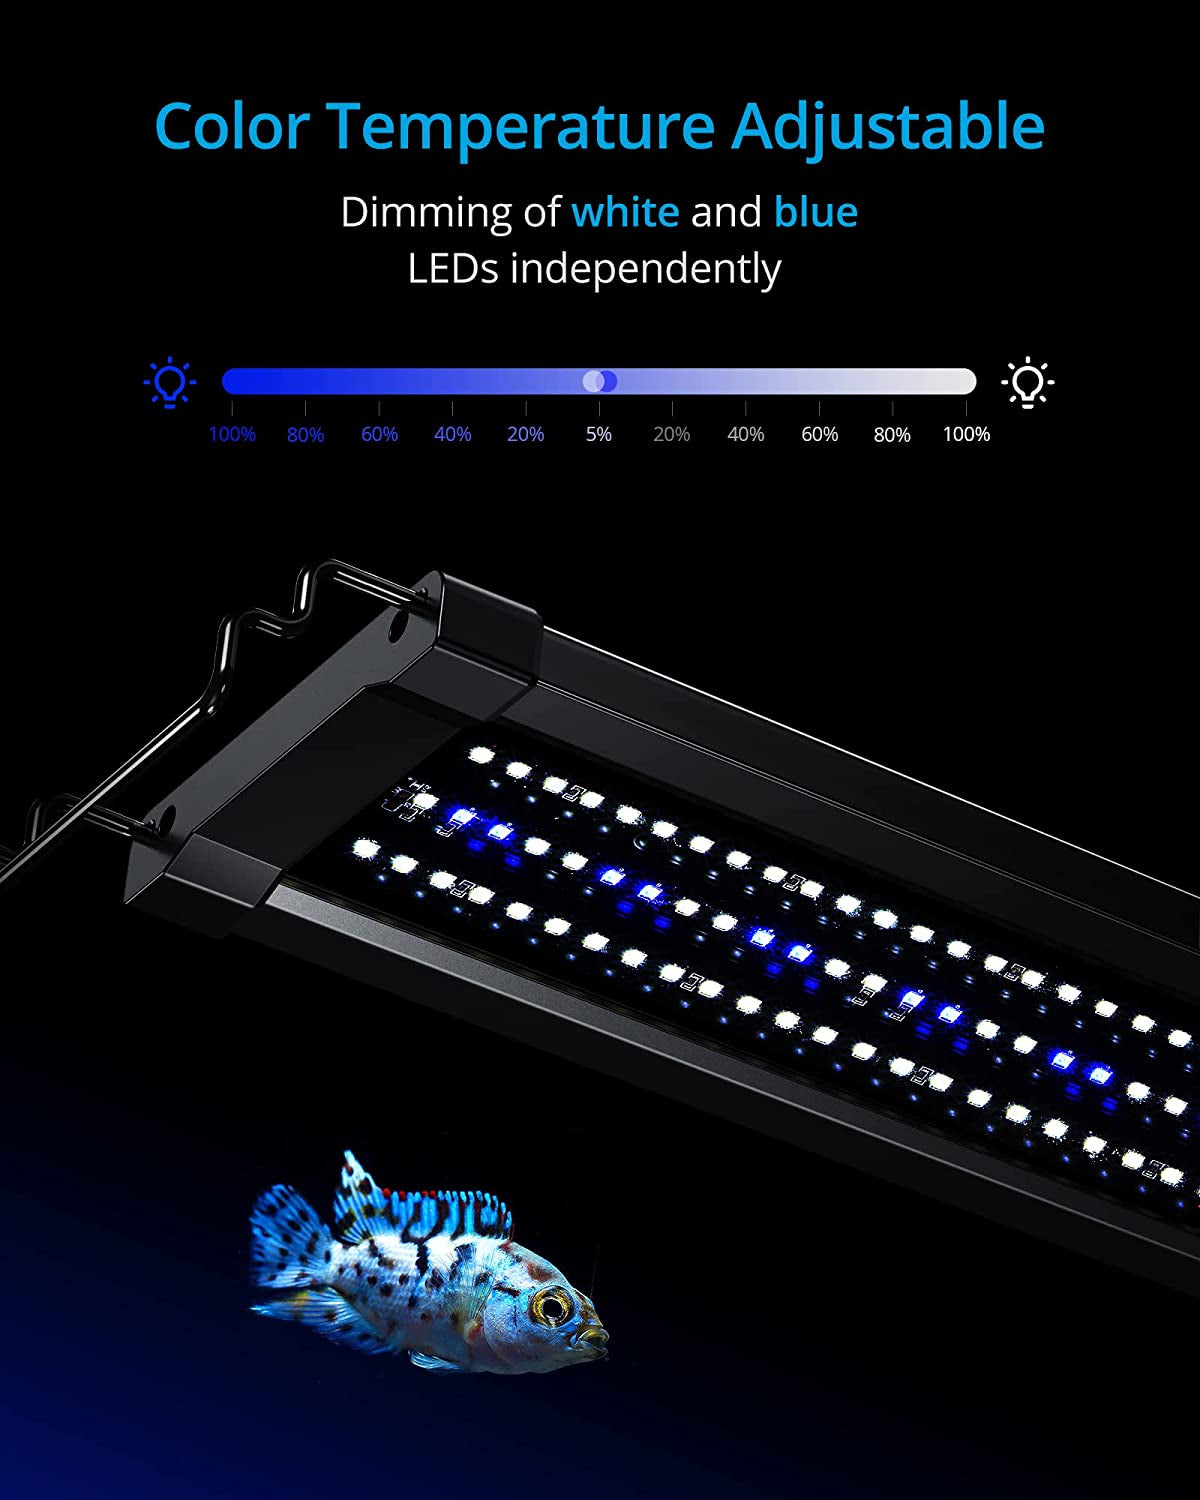 Classicled Gen 2 Aquarium Light, Dimmable LED Fish Tank Light with 2-Channel Control, White and Blue Leds, High Output, Size 18 to 24 Inch, 15 Watts